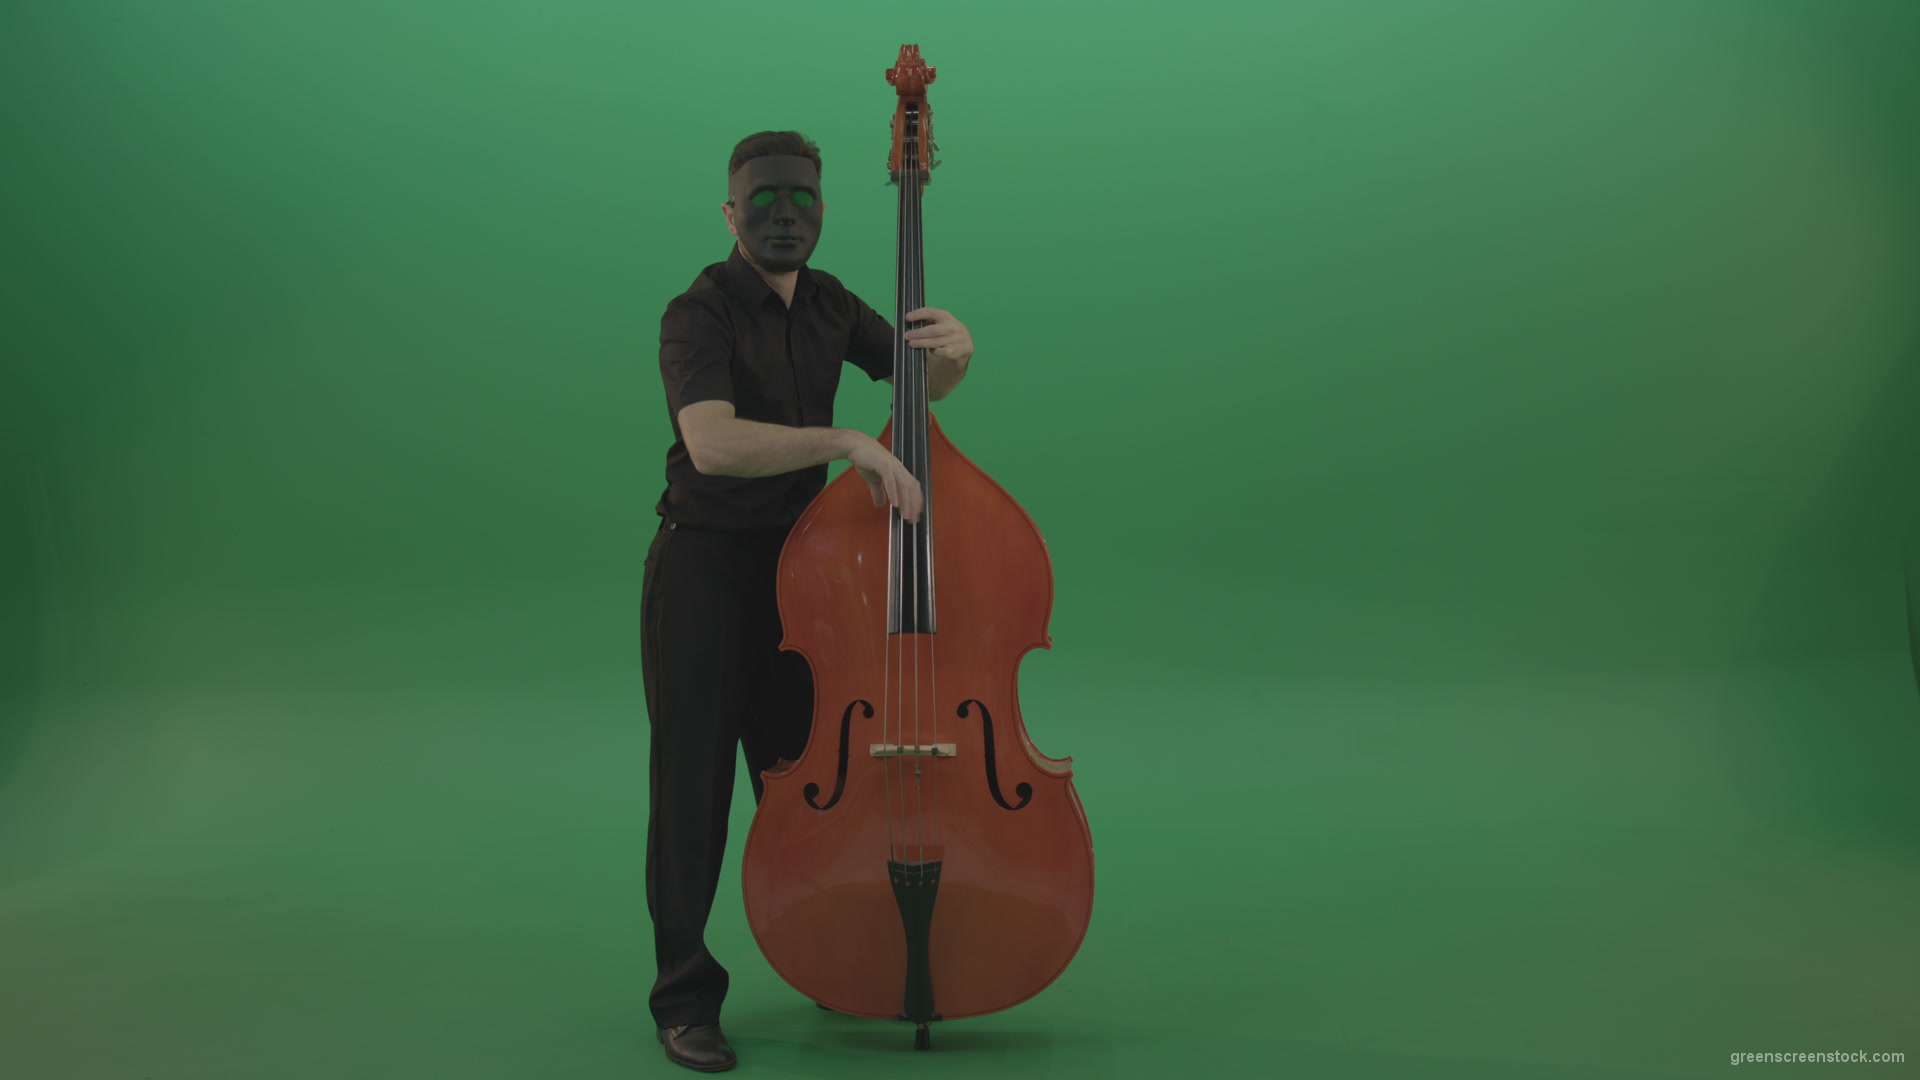 Full-size-man-in-black-gead-mask-with-chromakey-eyes-play-jazz-on-double-bass-String-music-instrument-isolated-on-green-screen_006 Green Screen Stock